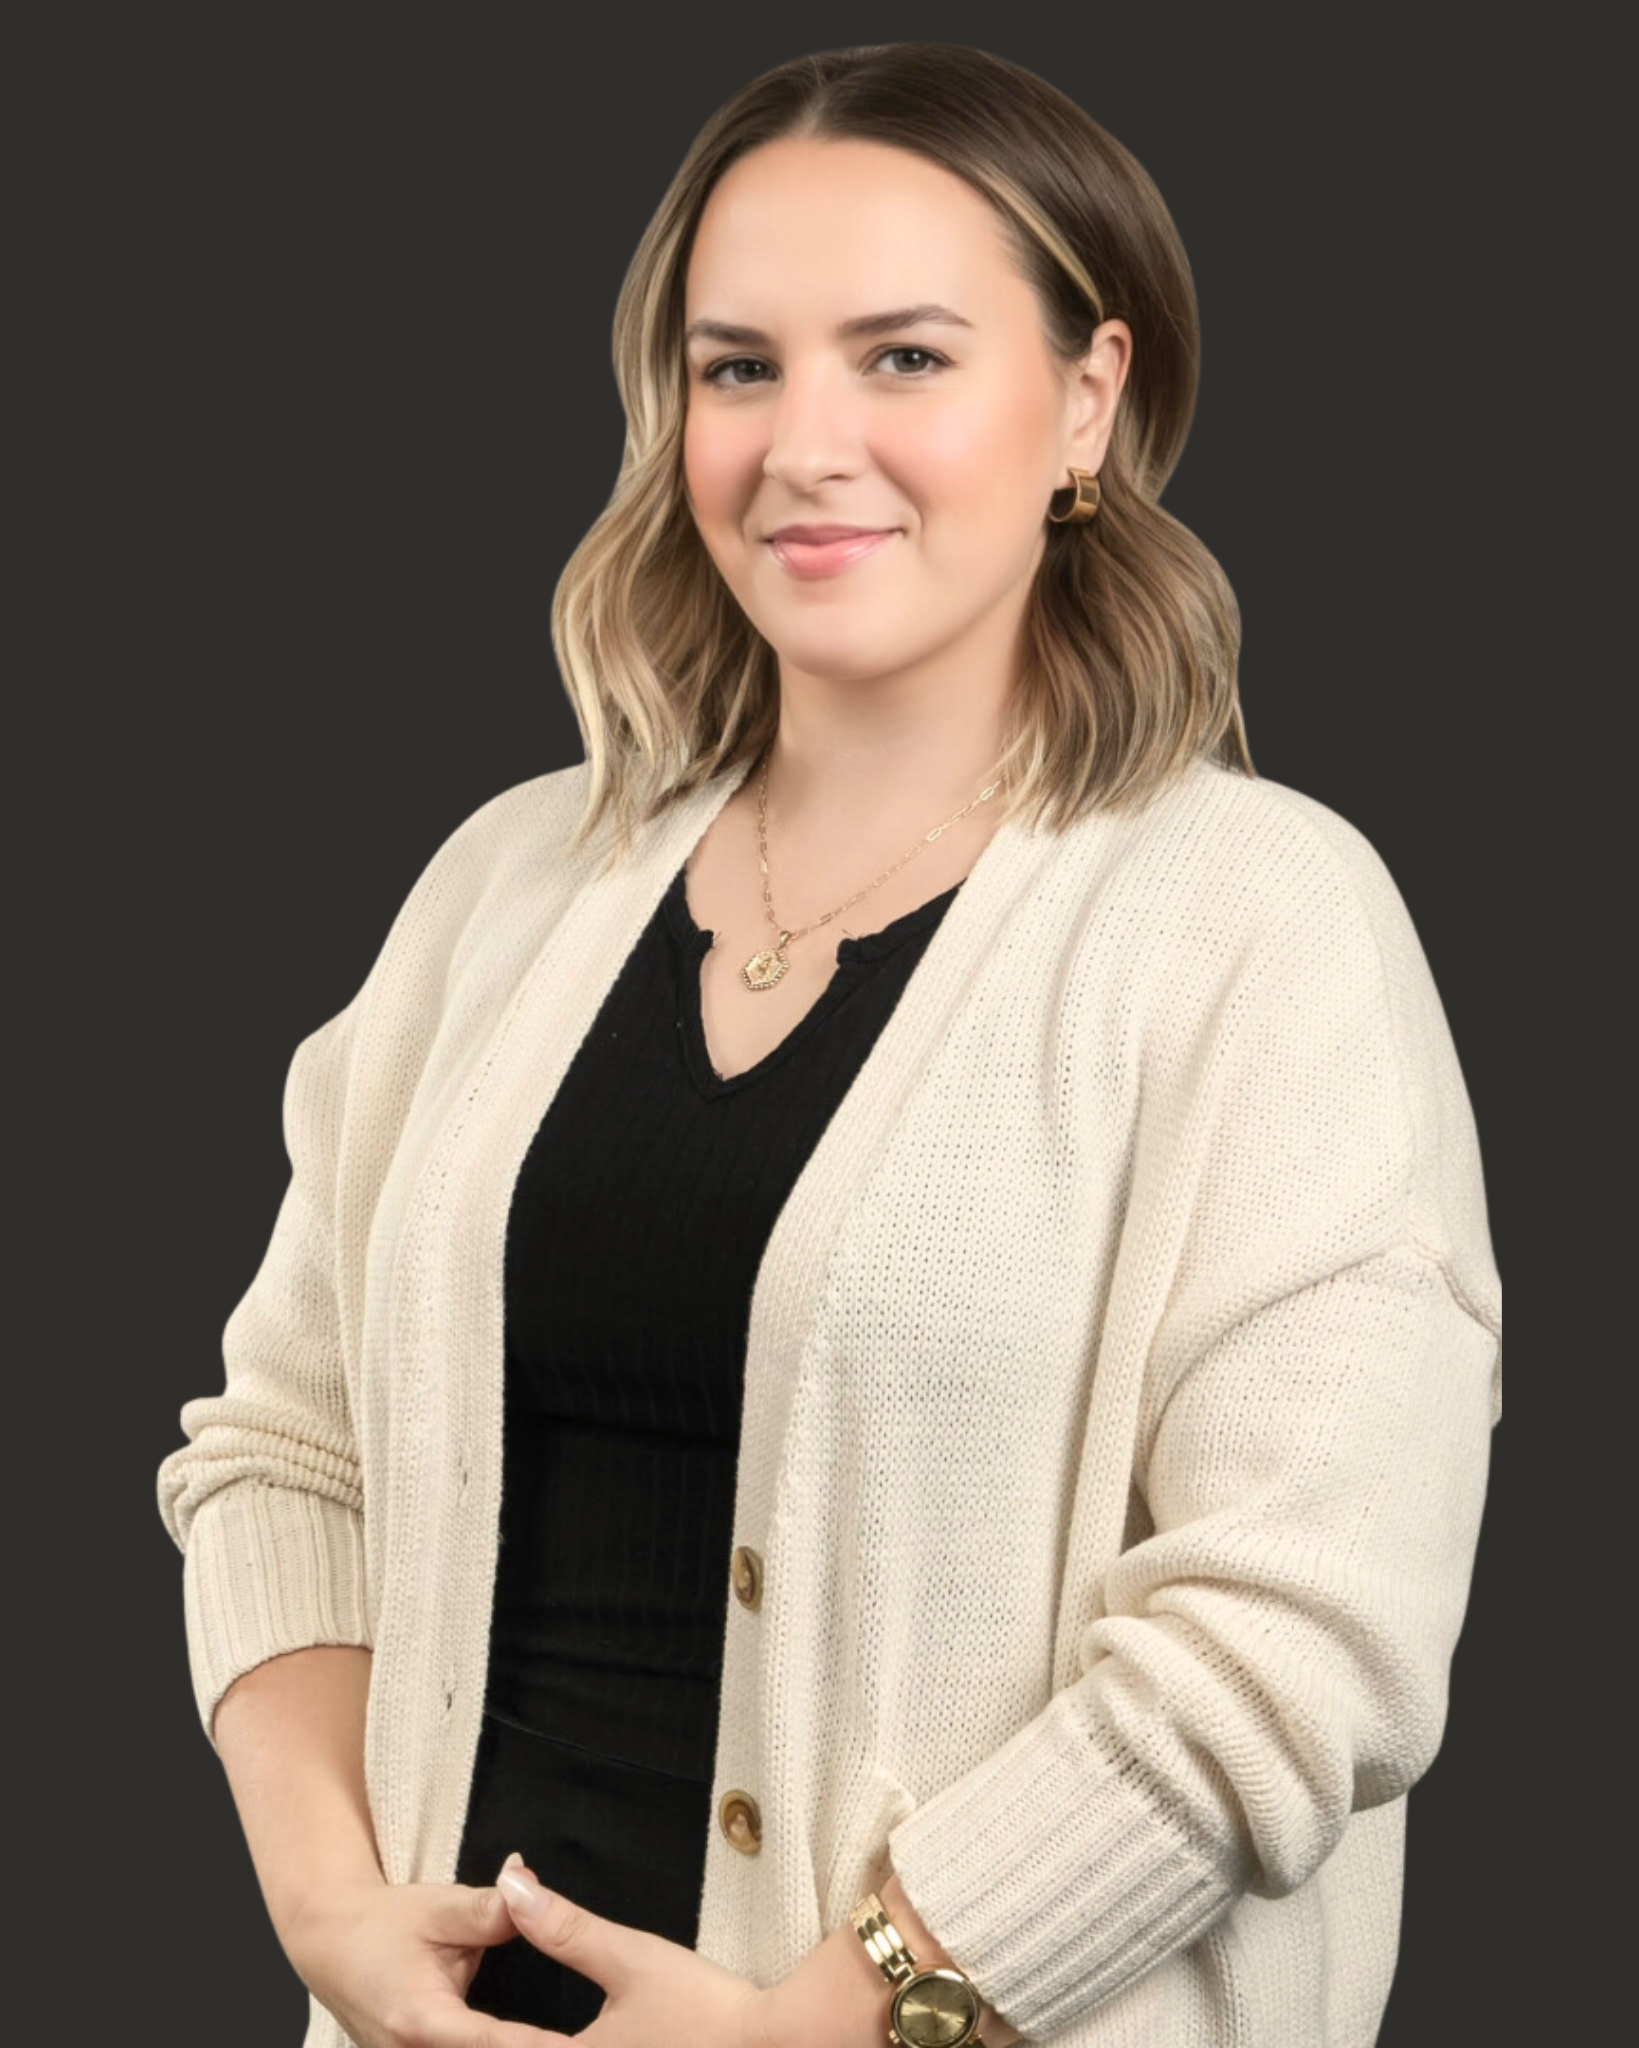 Ashlyn Rybiski, Office Manager at PH Realty, a real estate brokerage and team, specialized in topnotch marketing and home staging